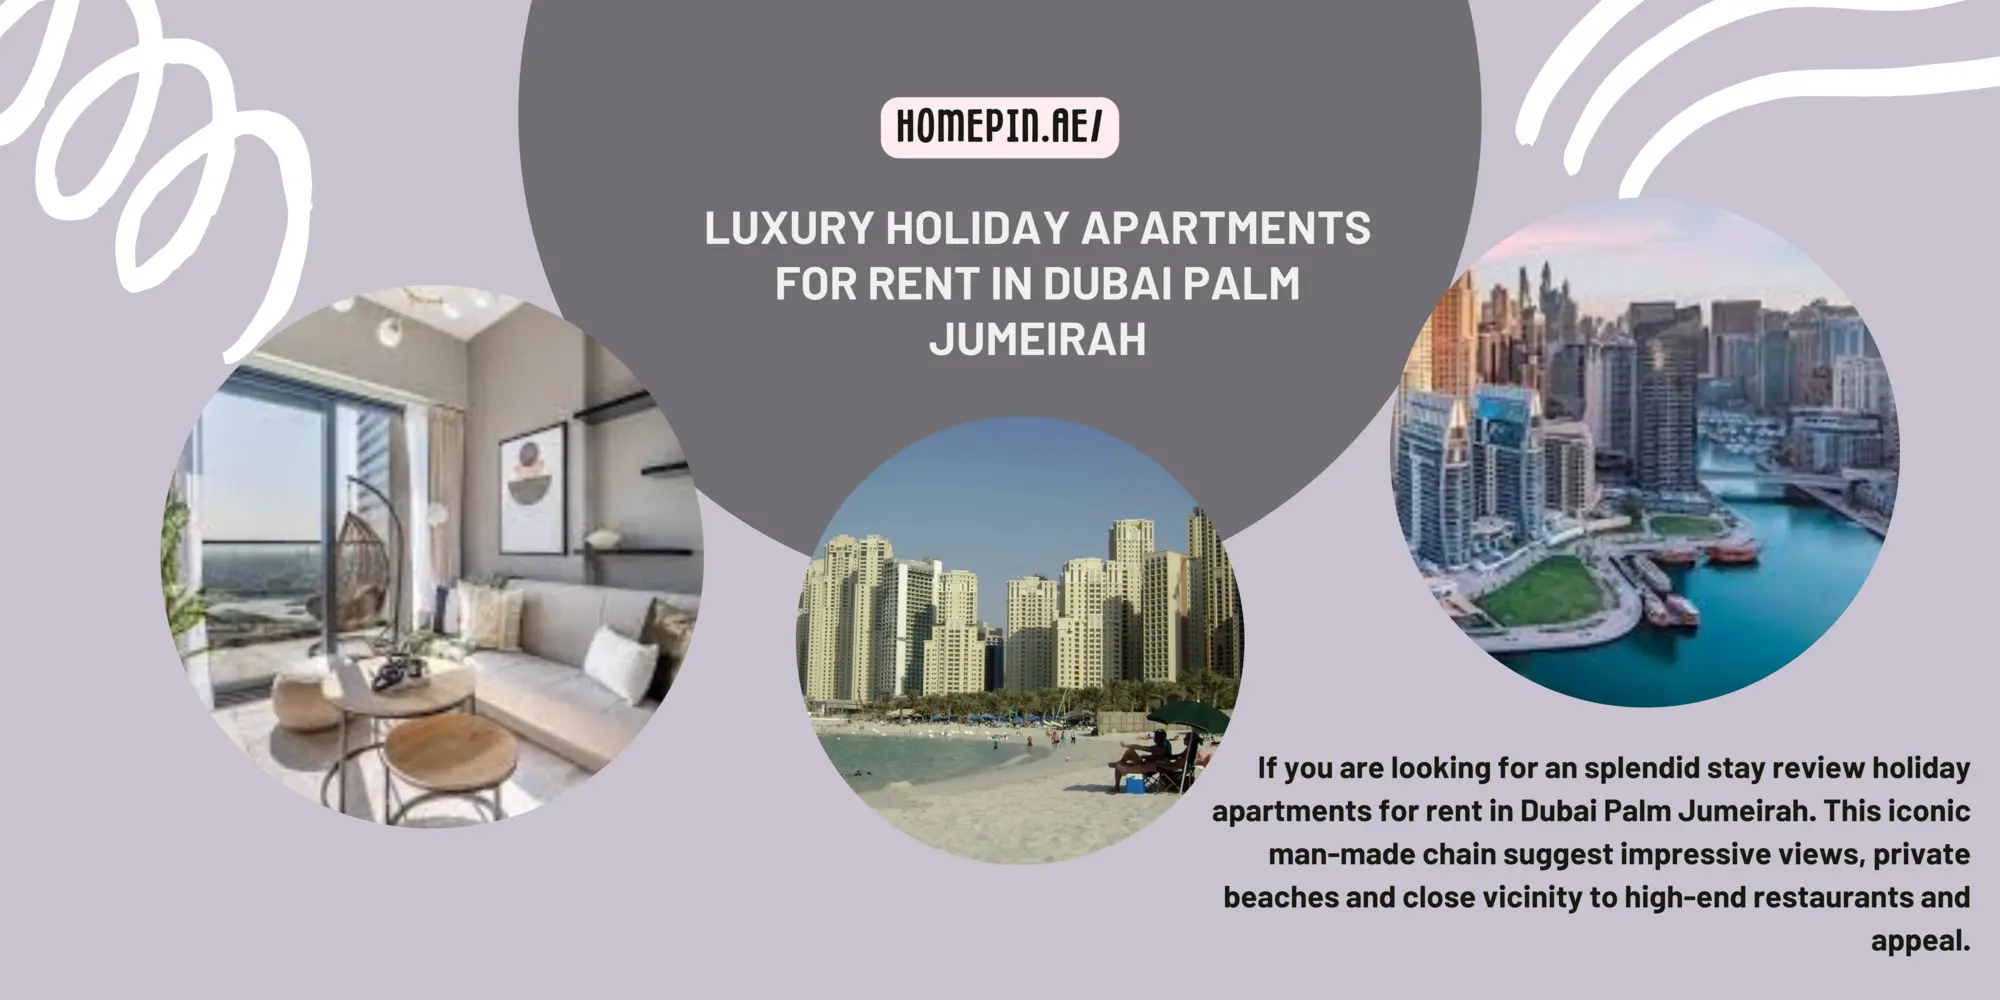 Dubai holiday apartments for rent